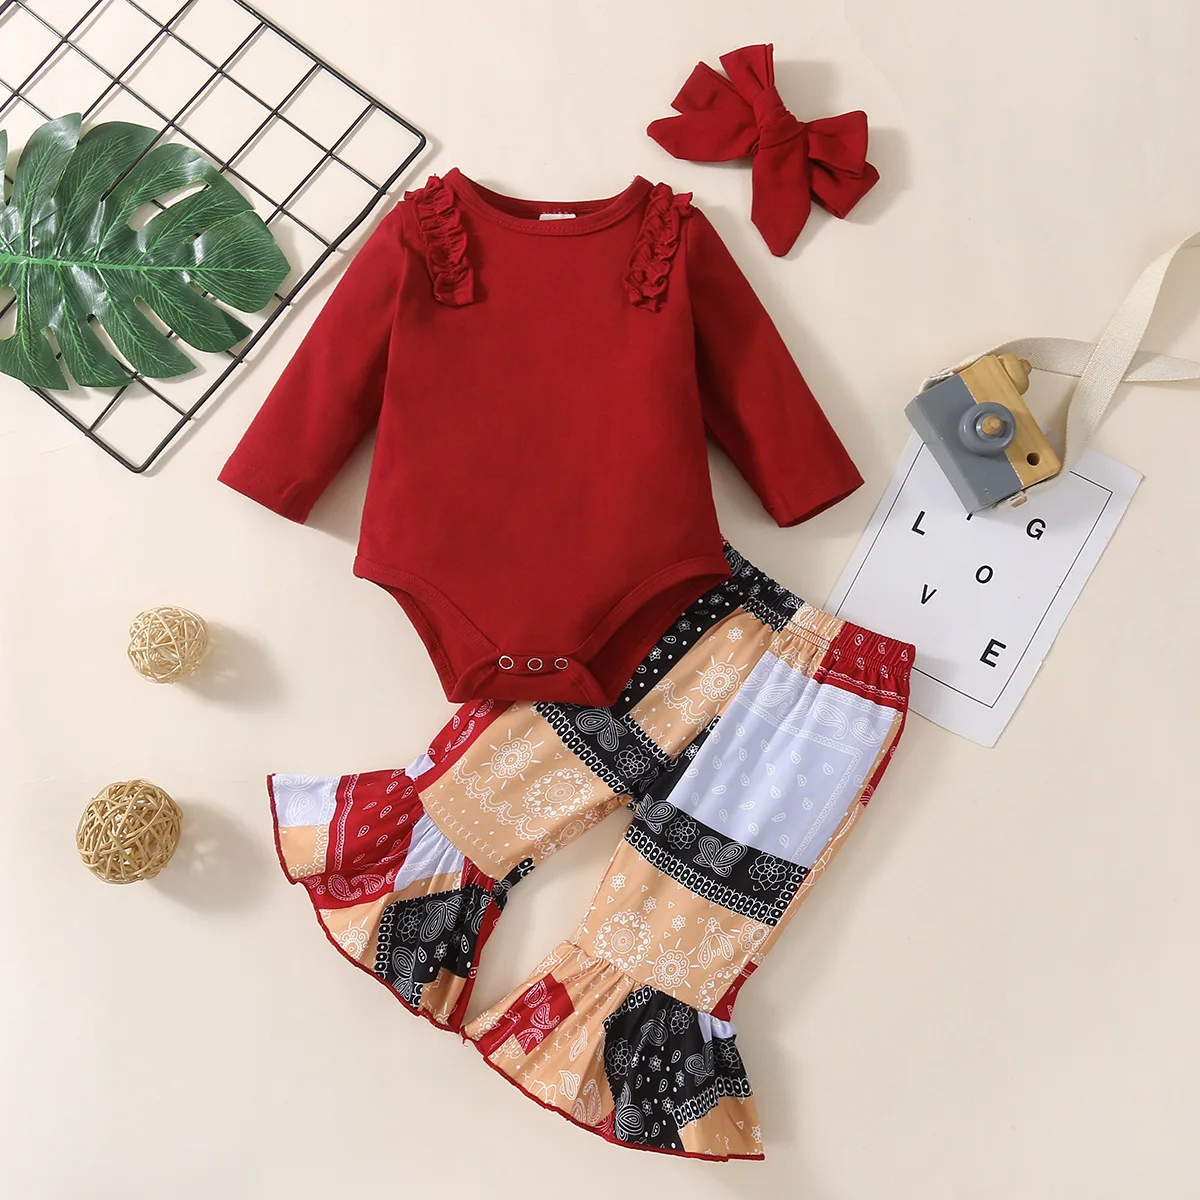 

Autumn Winter Infant Clothing Sets Baby Girl boutique Set solid Romper Tops+flare Pants 3pcs Outfits suits, As image shown